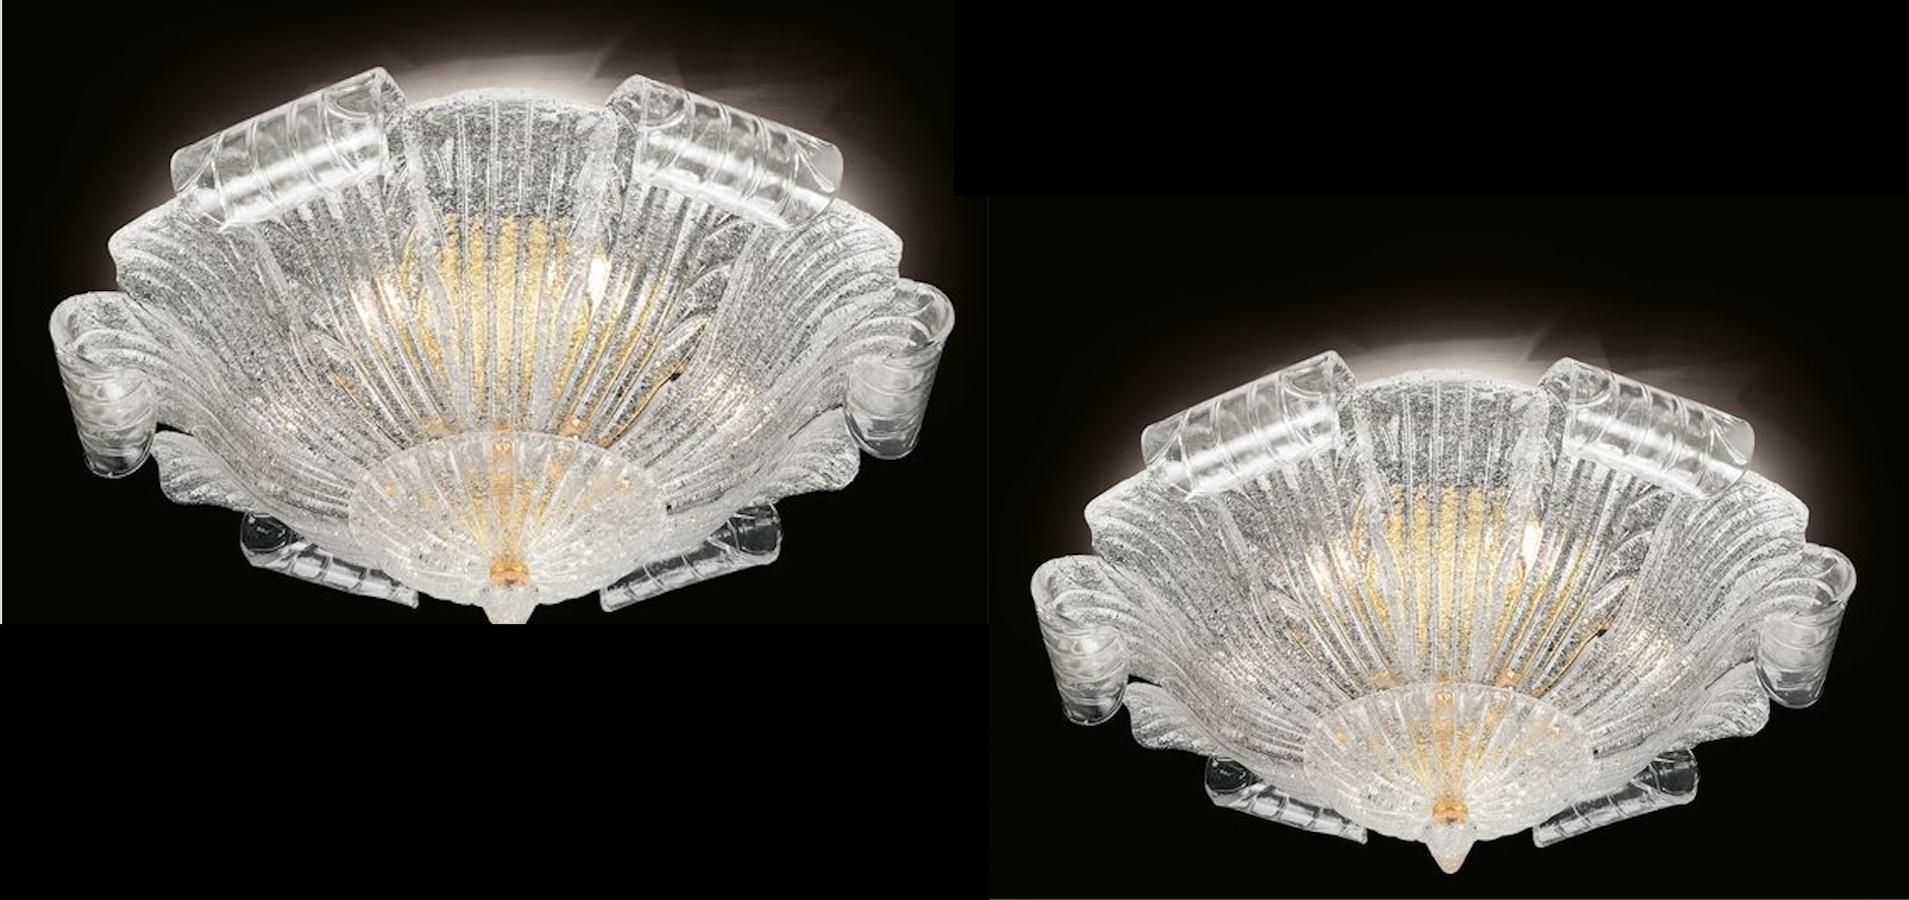 This ceiling lights realized in pure Murano glass large leaves with amazing 24 carat gold-plated structure and canopy.
This beautiful ceiling light gives an elegant ambience a special flair and is an absolute eyecatcher even when switched